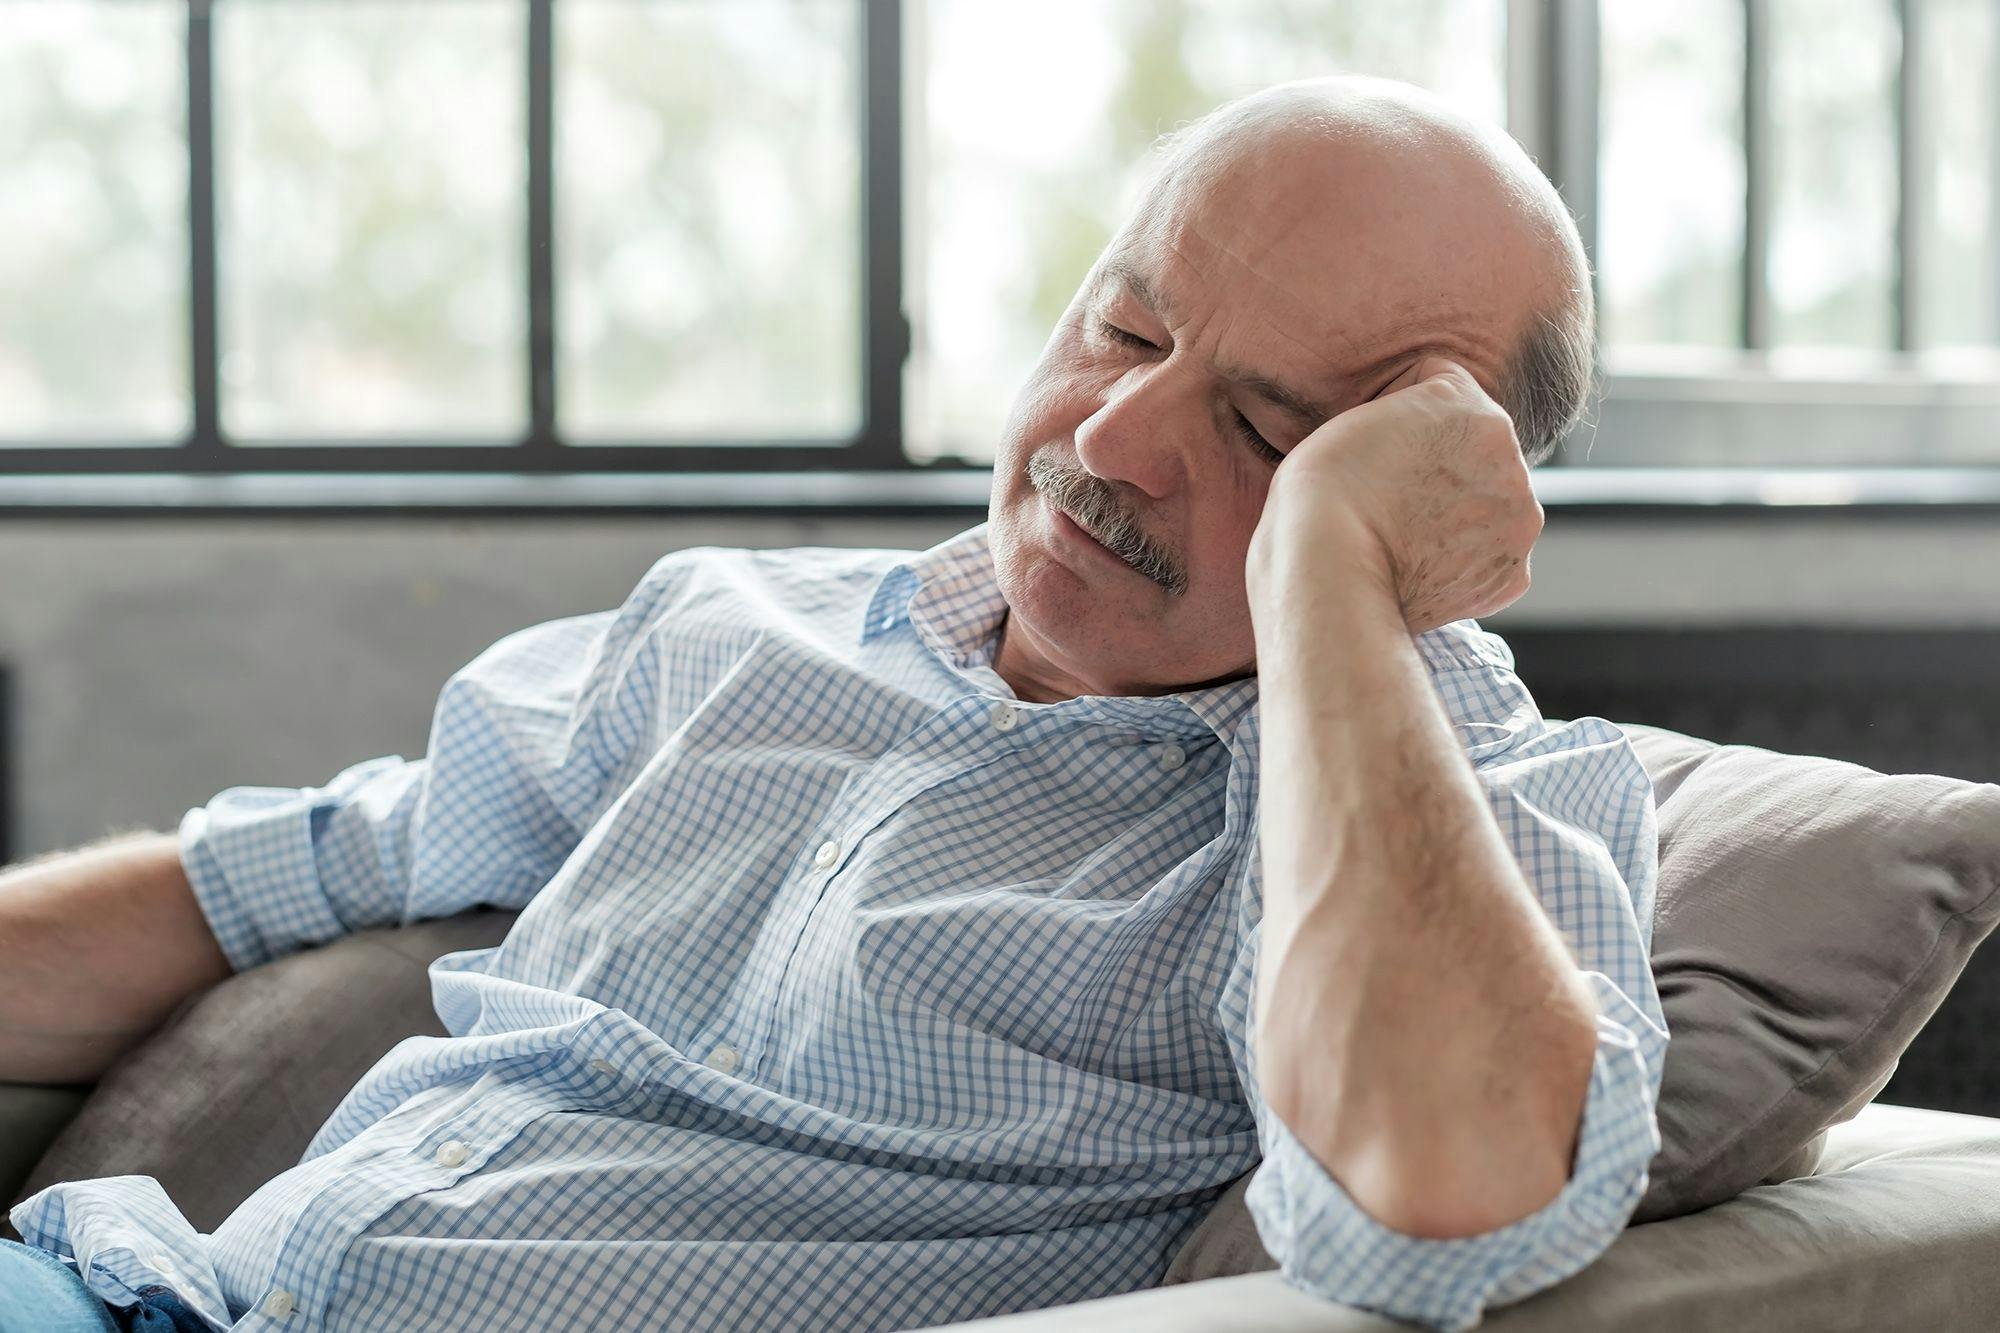 Sleep Abnormalities Linked With Increased PD Risk in Older Men